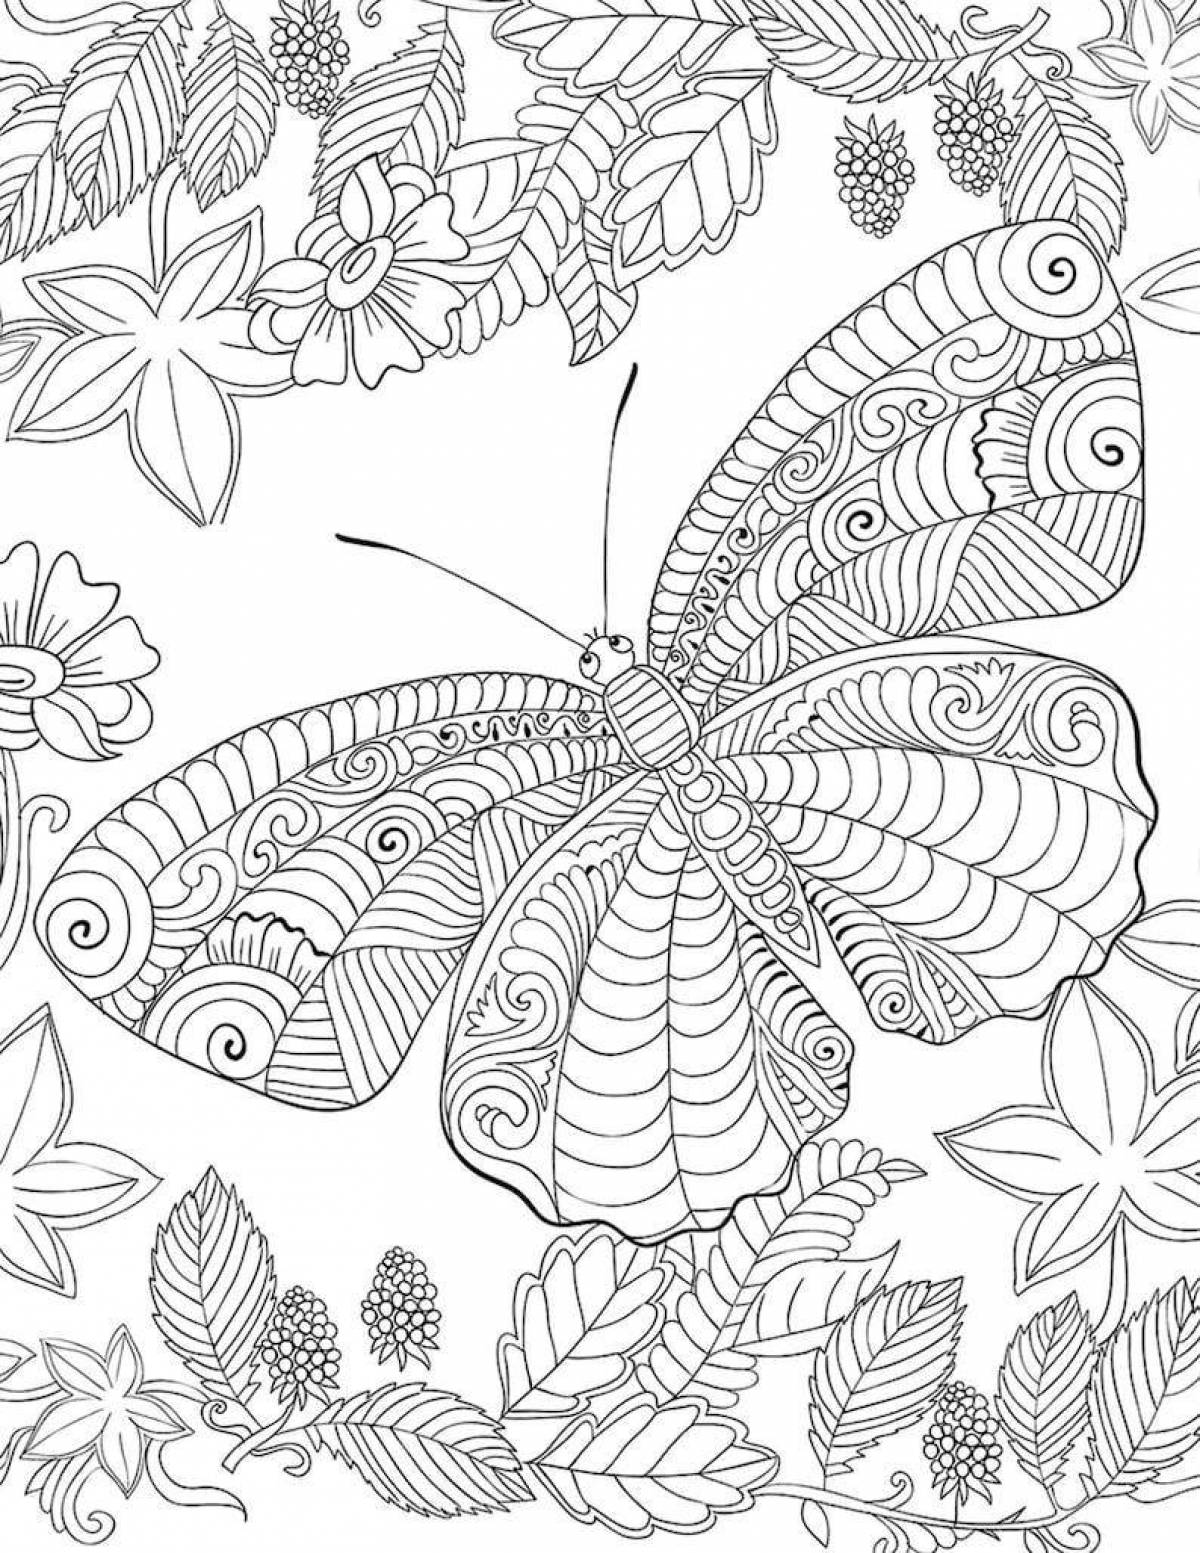 Blissful anti-stress coloring book for kids